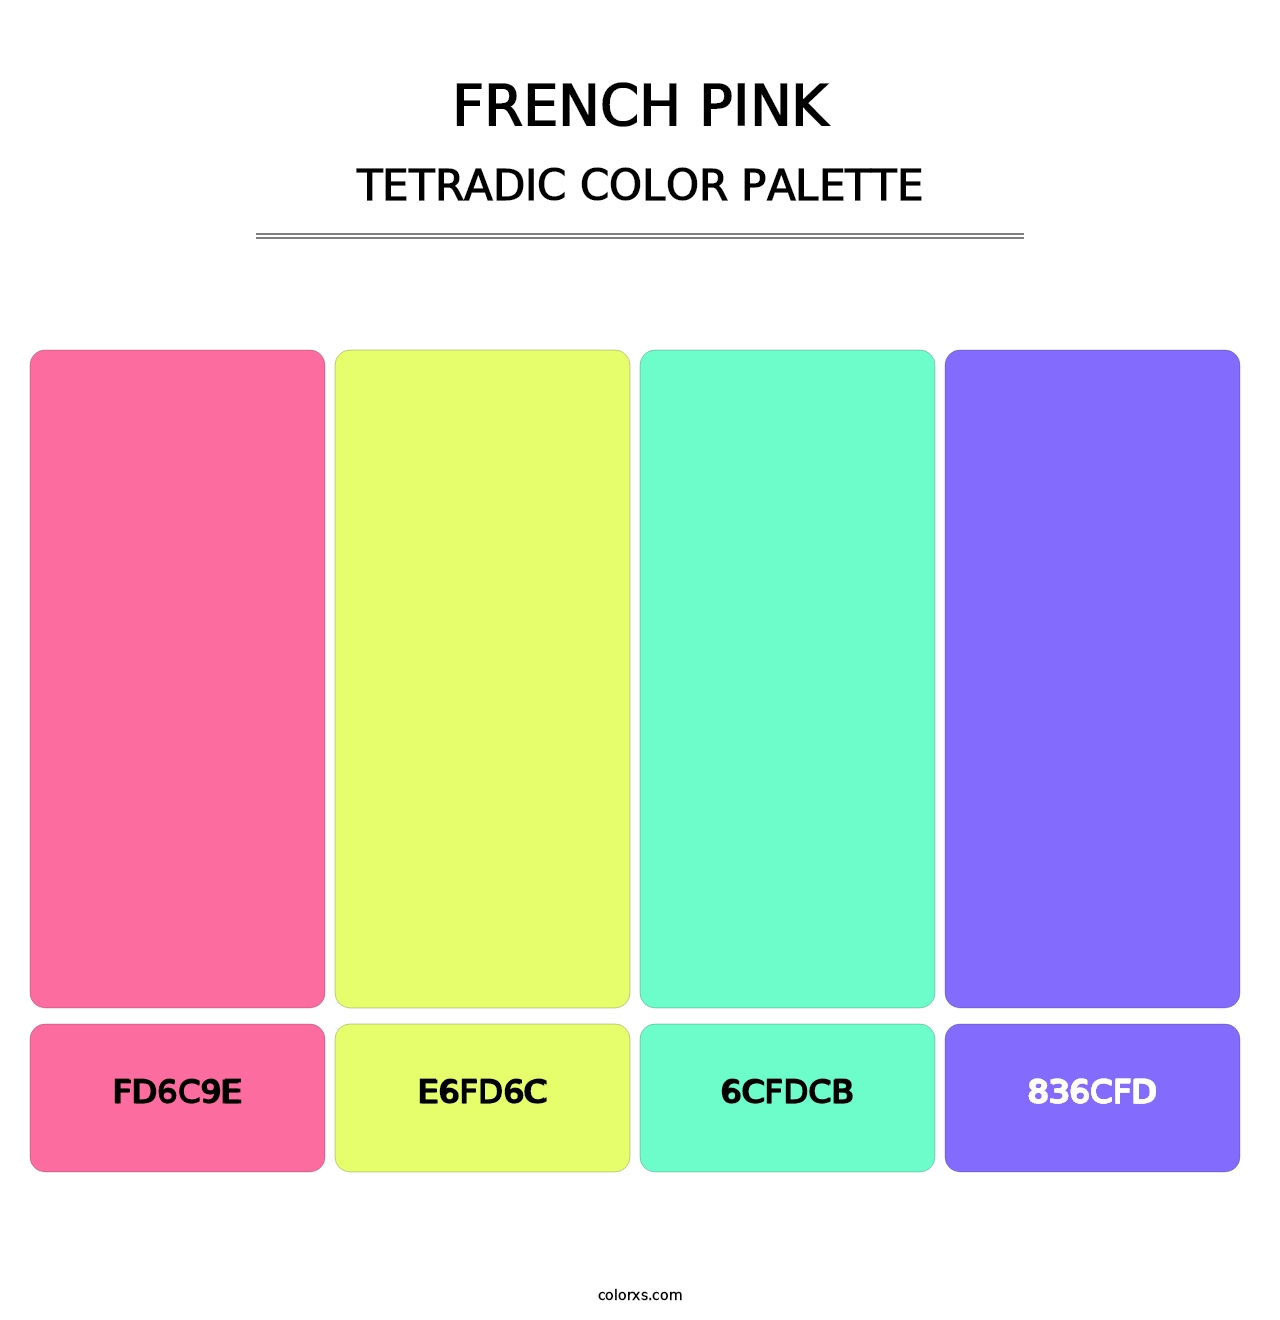 French Pink - Tetradic Color Palette